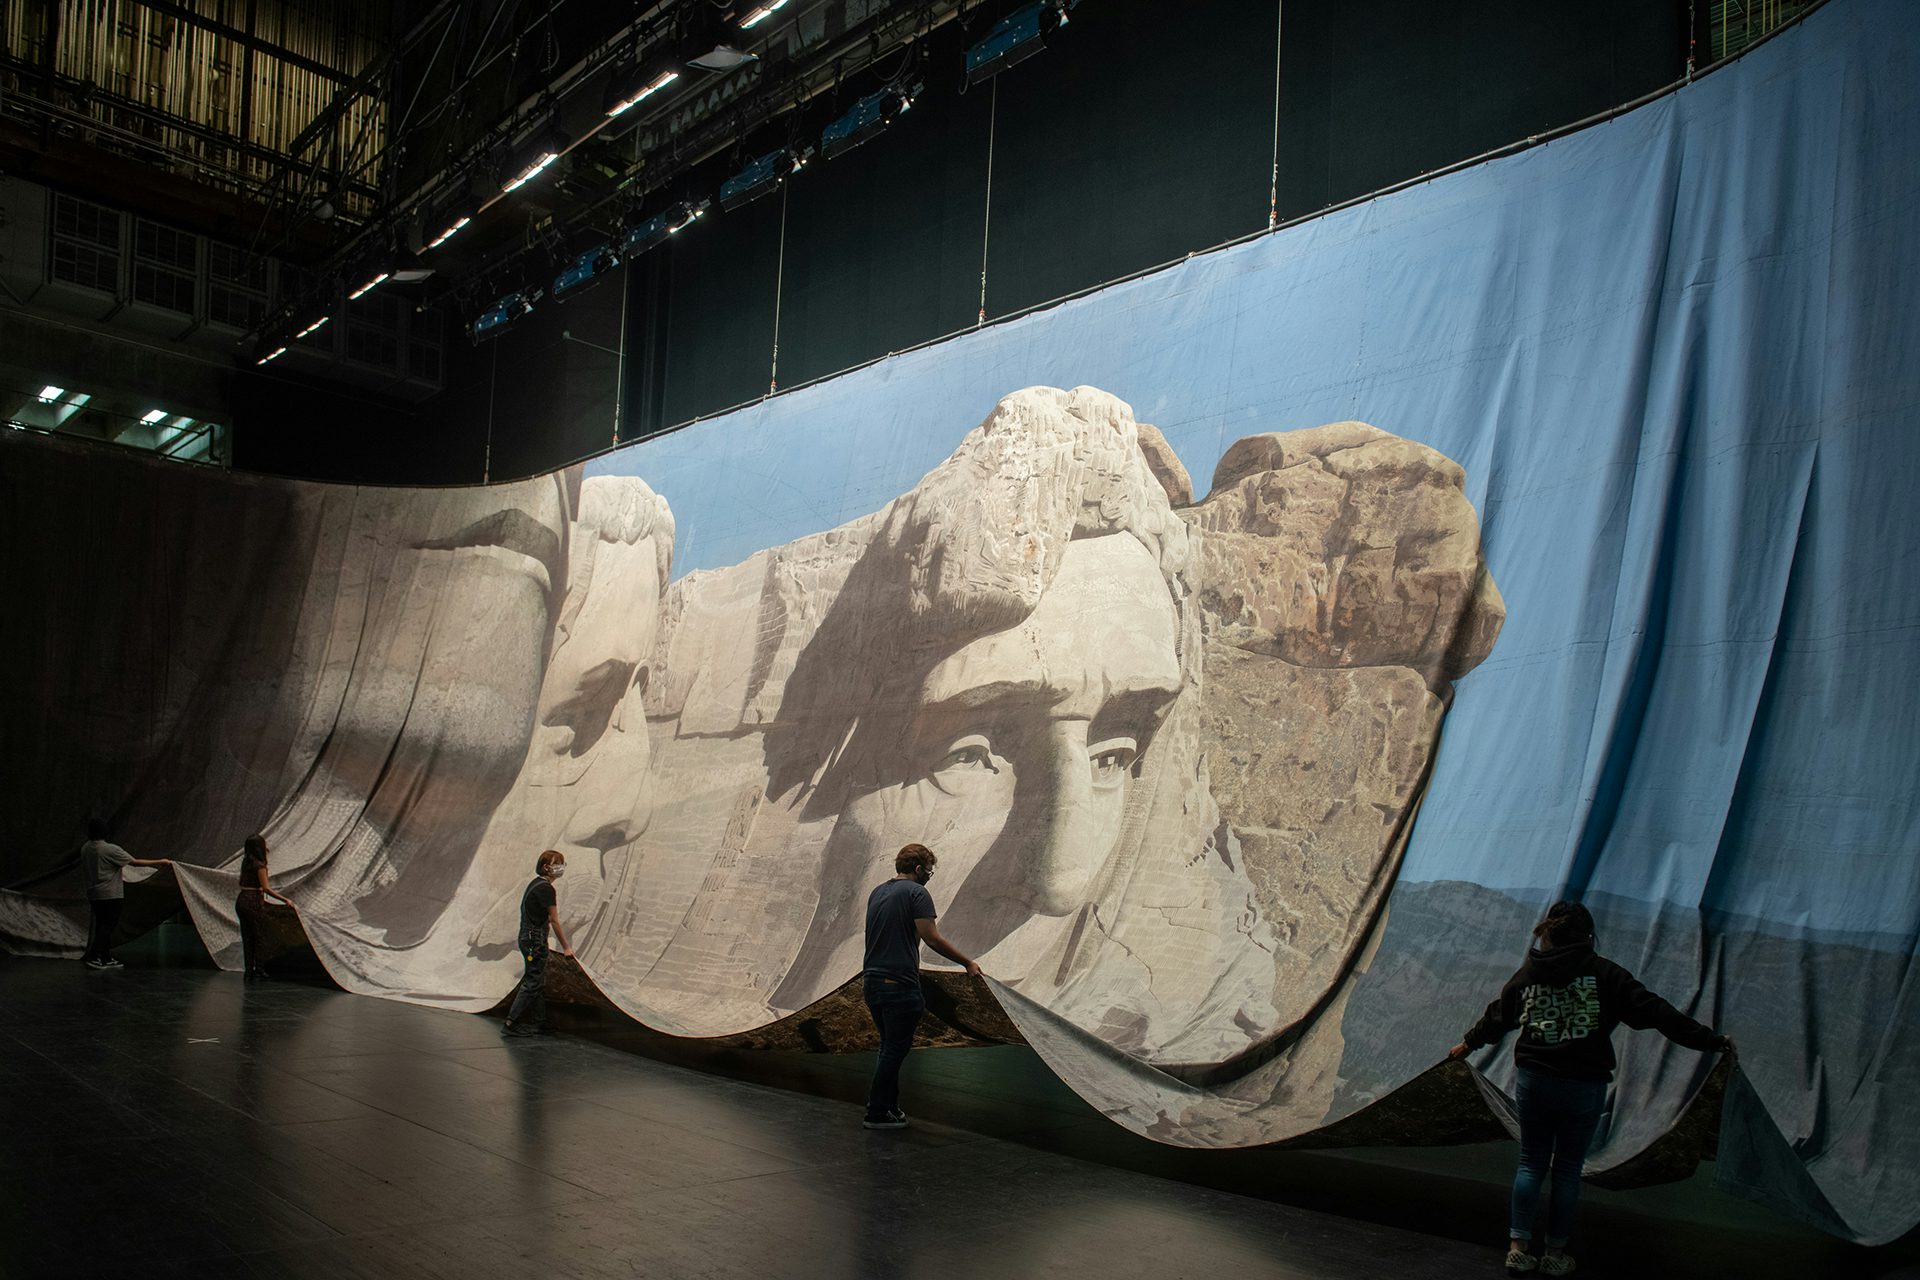 Photograph of people unravelling a backdrop of Mount Rushmore used in the movie North by Northwest